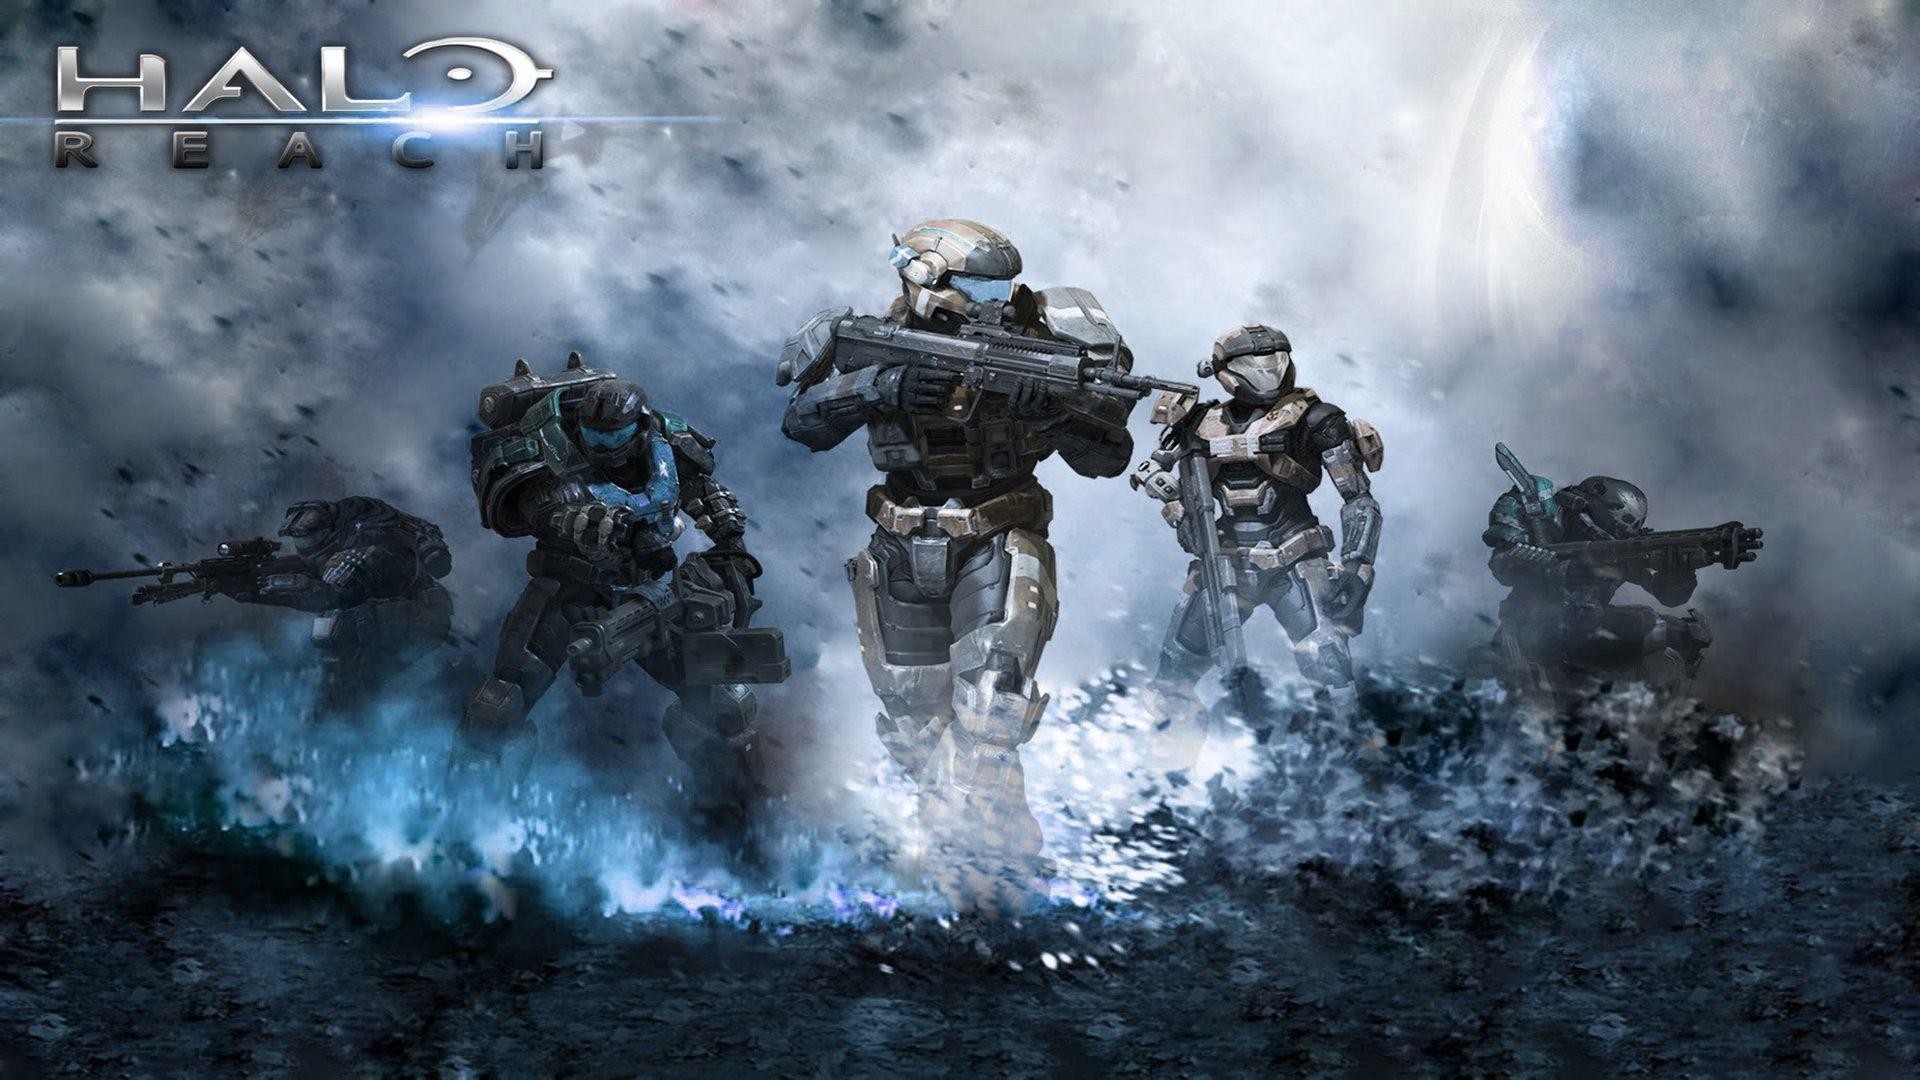 Halo Wallpapers 4k Hd Halo Backgrounds On Wallpaperbat